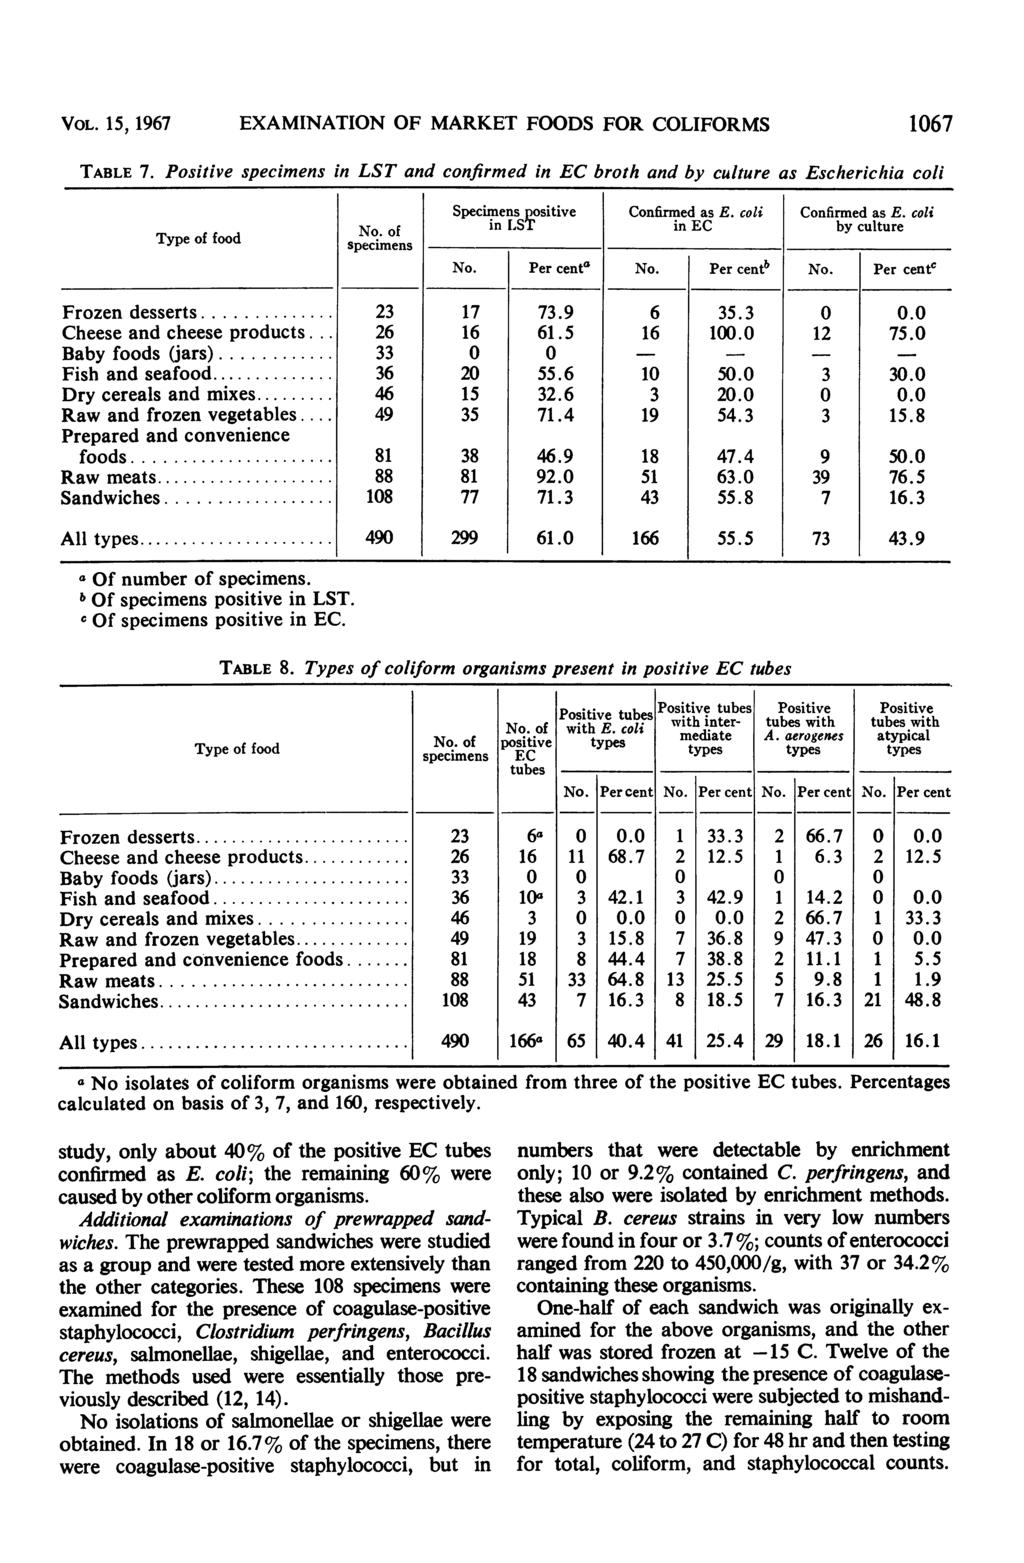 VOL. 15, 1967 EXAMINATION OF MARKET FOODS FOR COLIFORMS 1067 TABLE 7. Positive specimens in LST and confirmed in EC broth and by culture as Escherichia coli Specimens positive Confirmed as E.